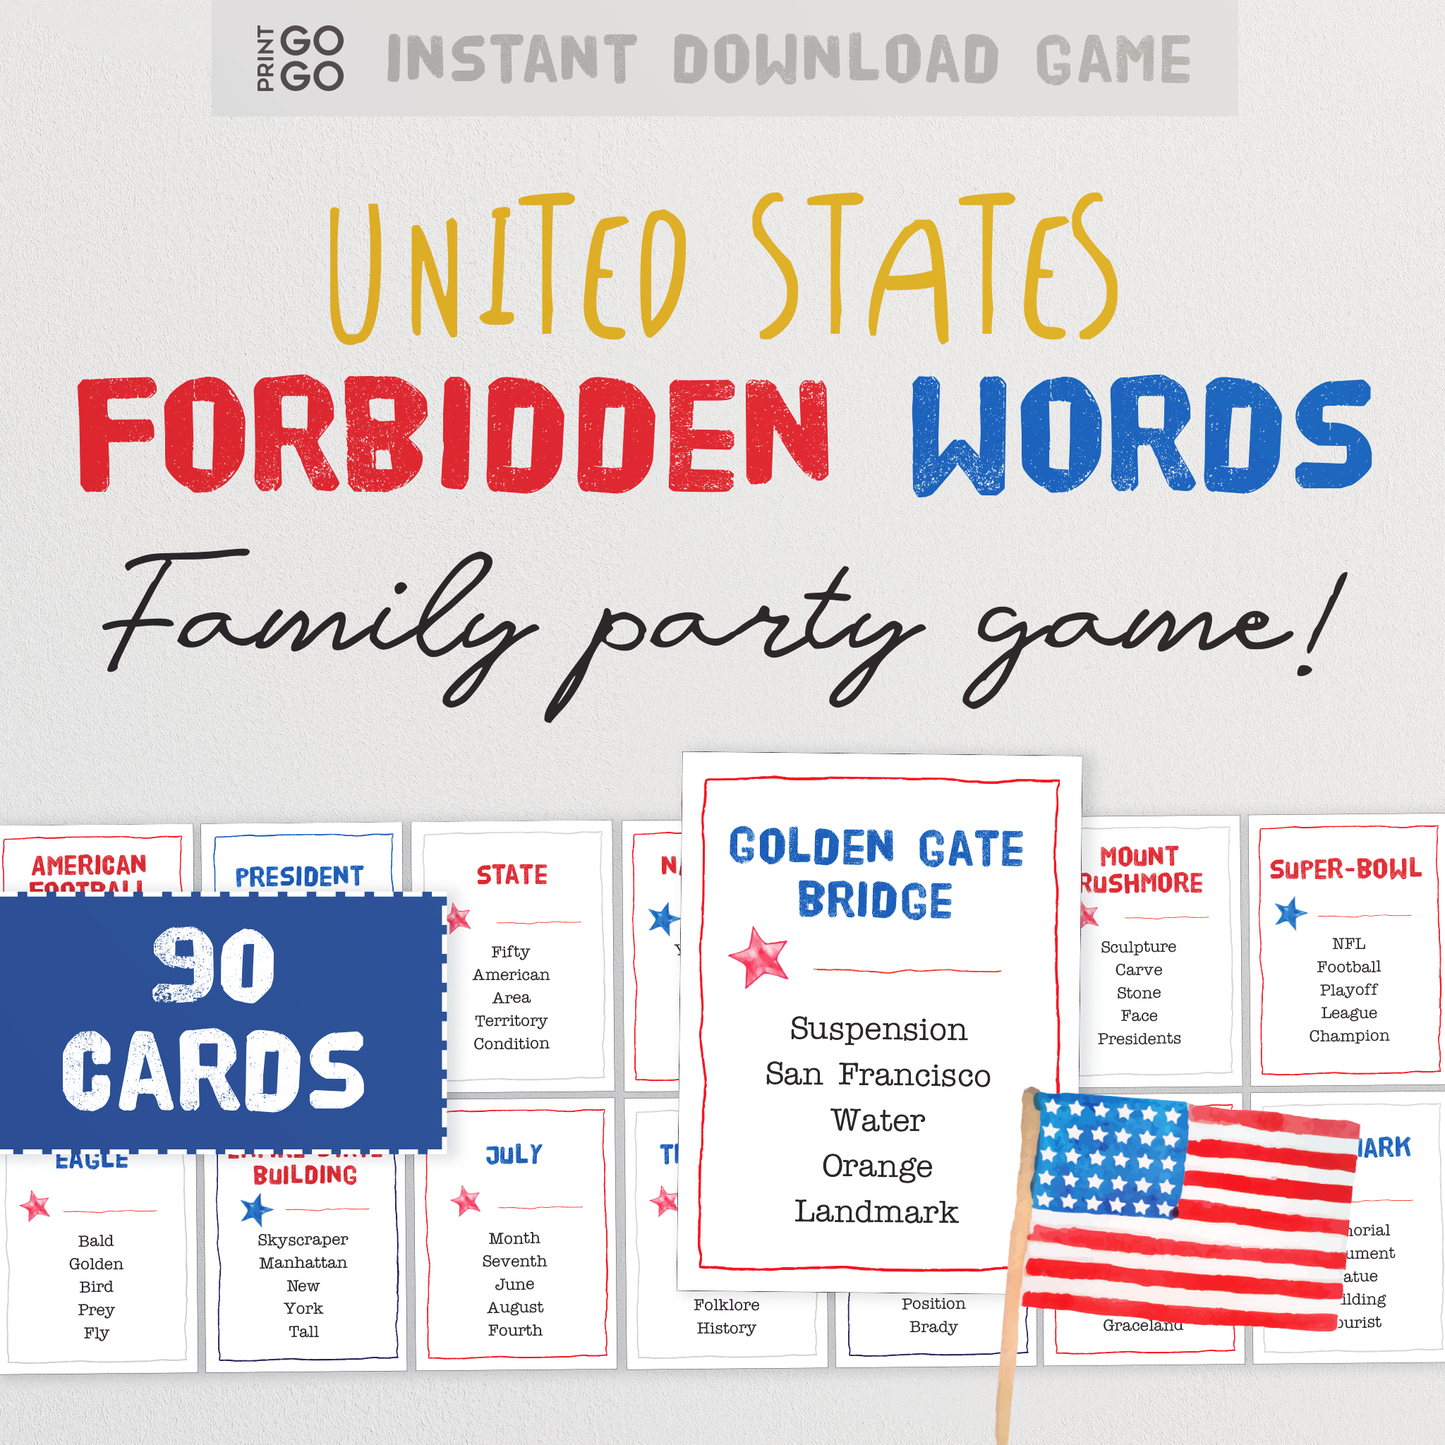 USA Forbidden Words - The Hilarious Party Game of Giving Careful Clues